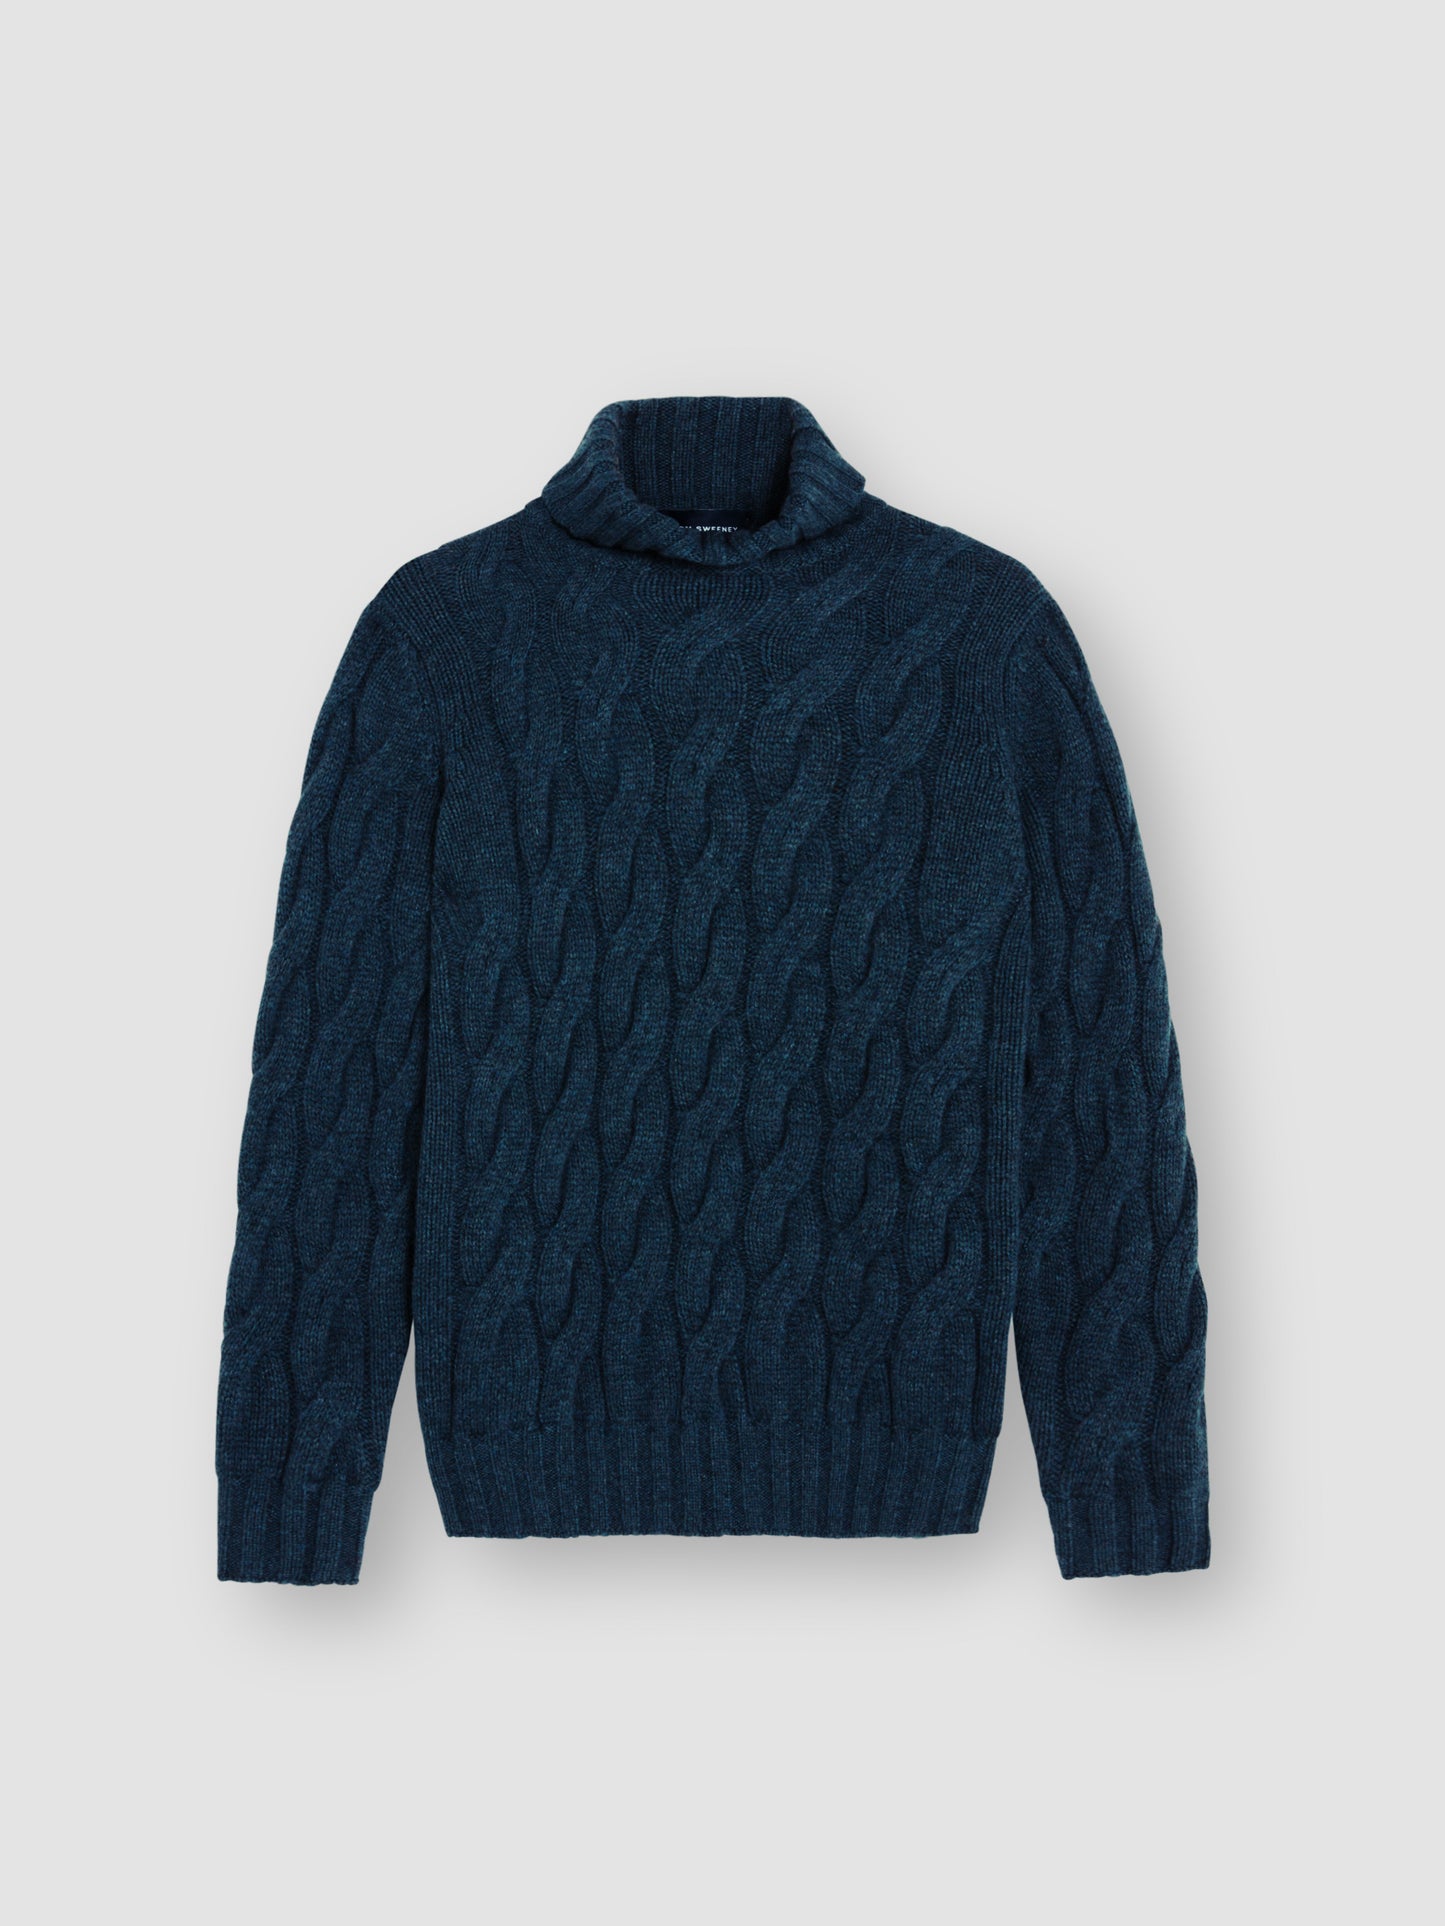 Chunky Cashmere Cable Knit Sweater Moss Blue Product Image